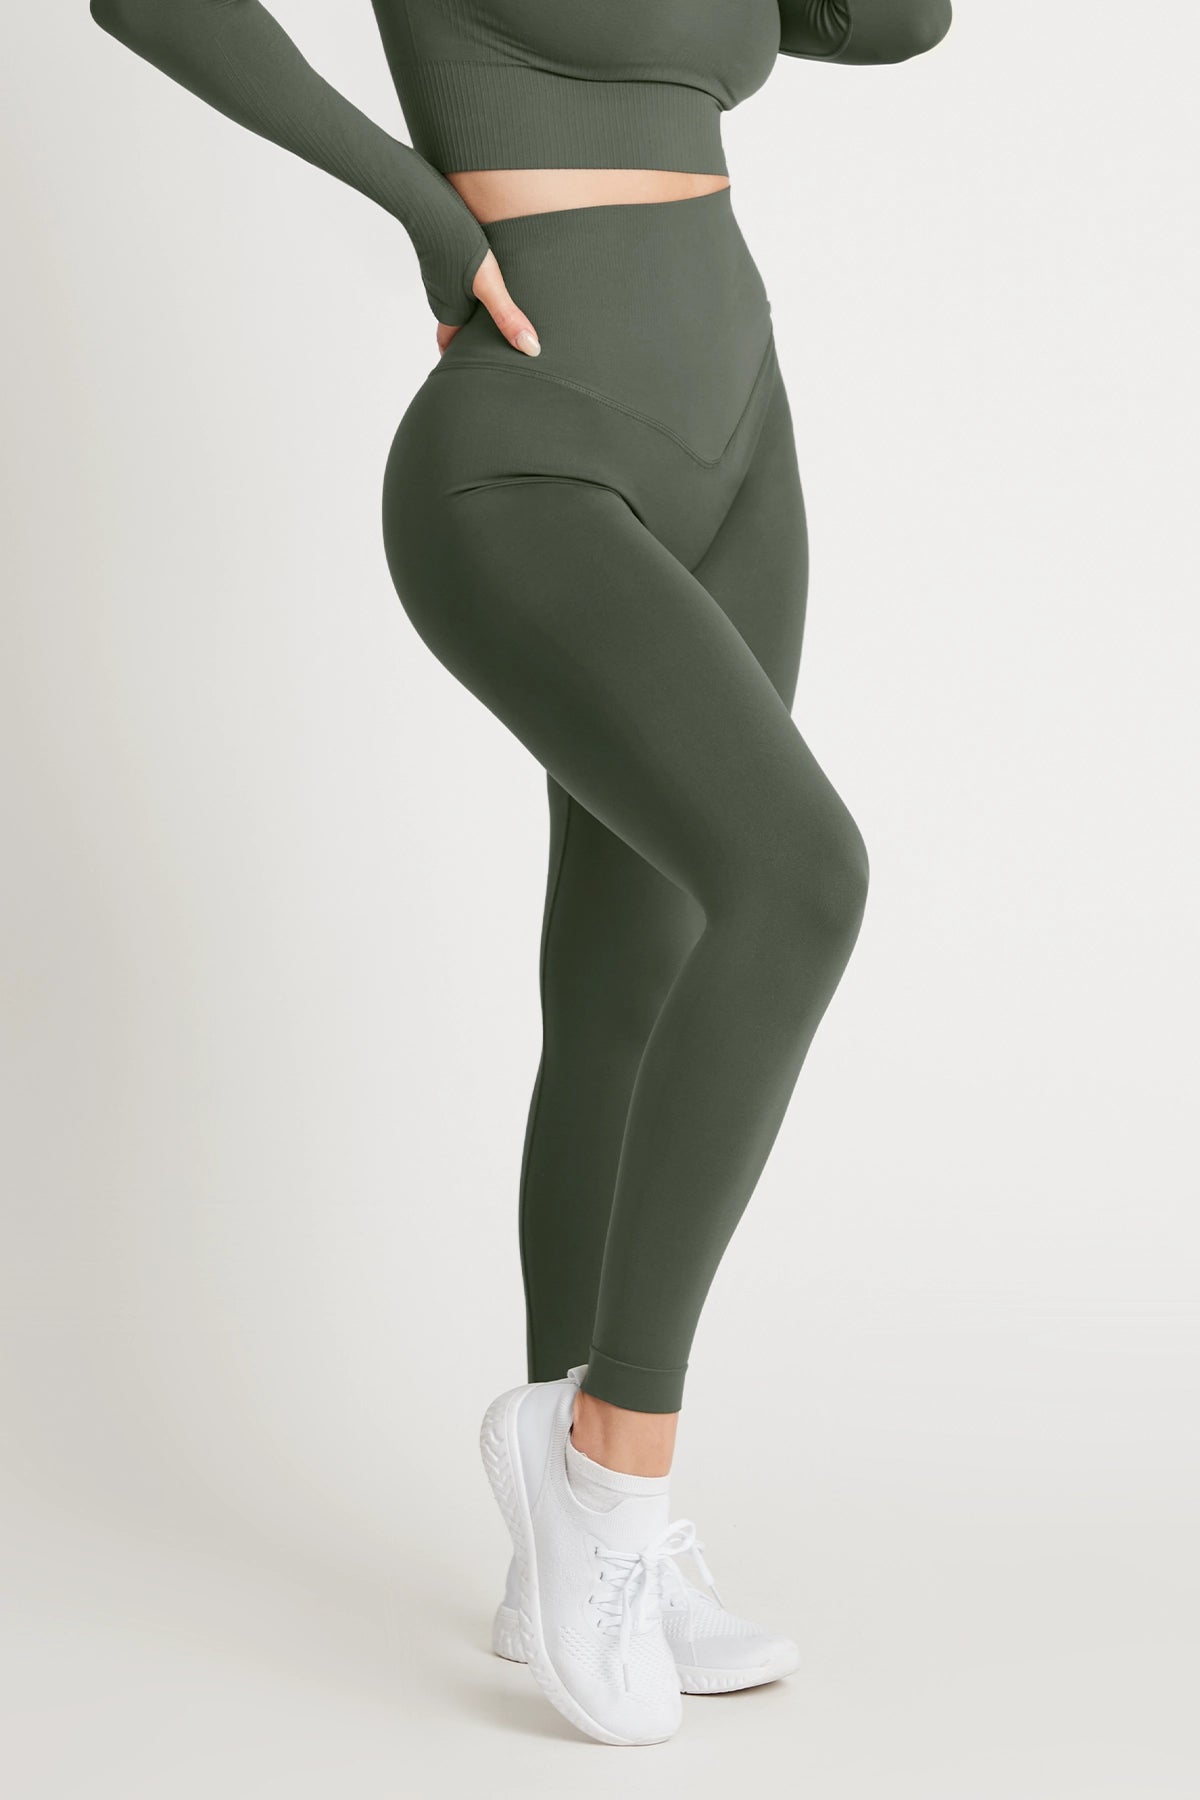 Shaping slimming leggings PUSH UP MAX K001A green MITARE Size M Color Green